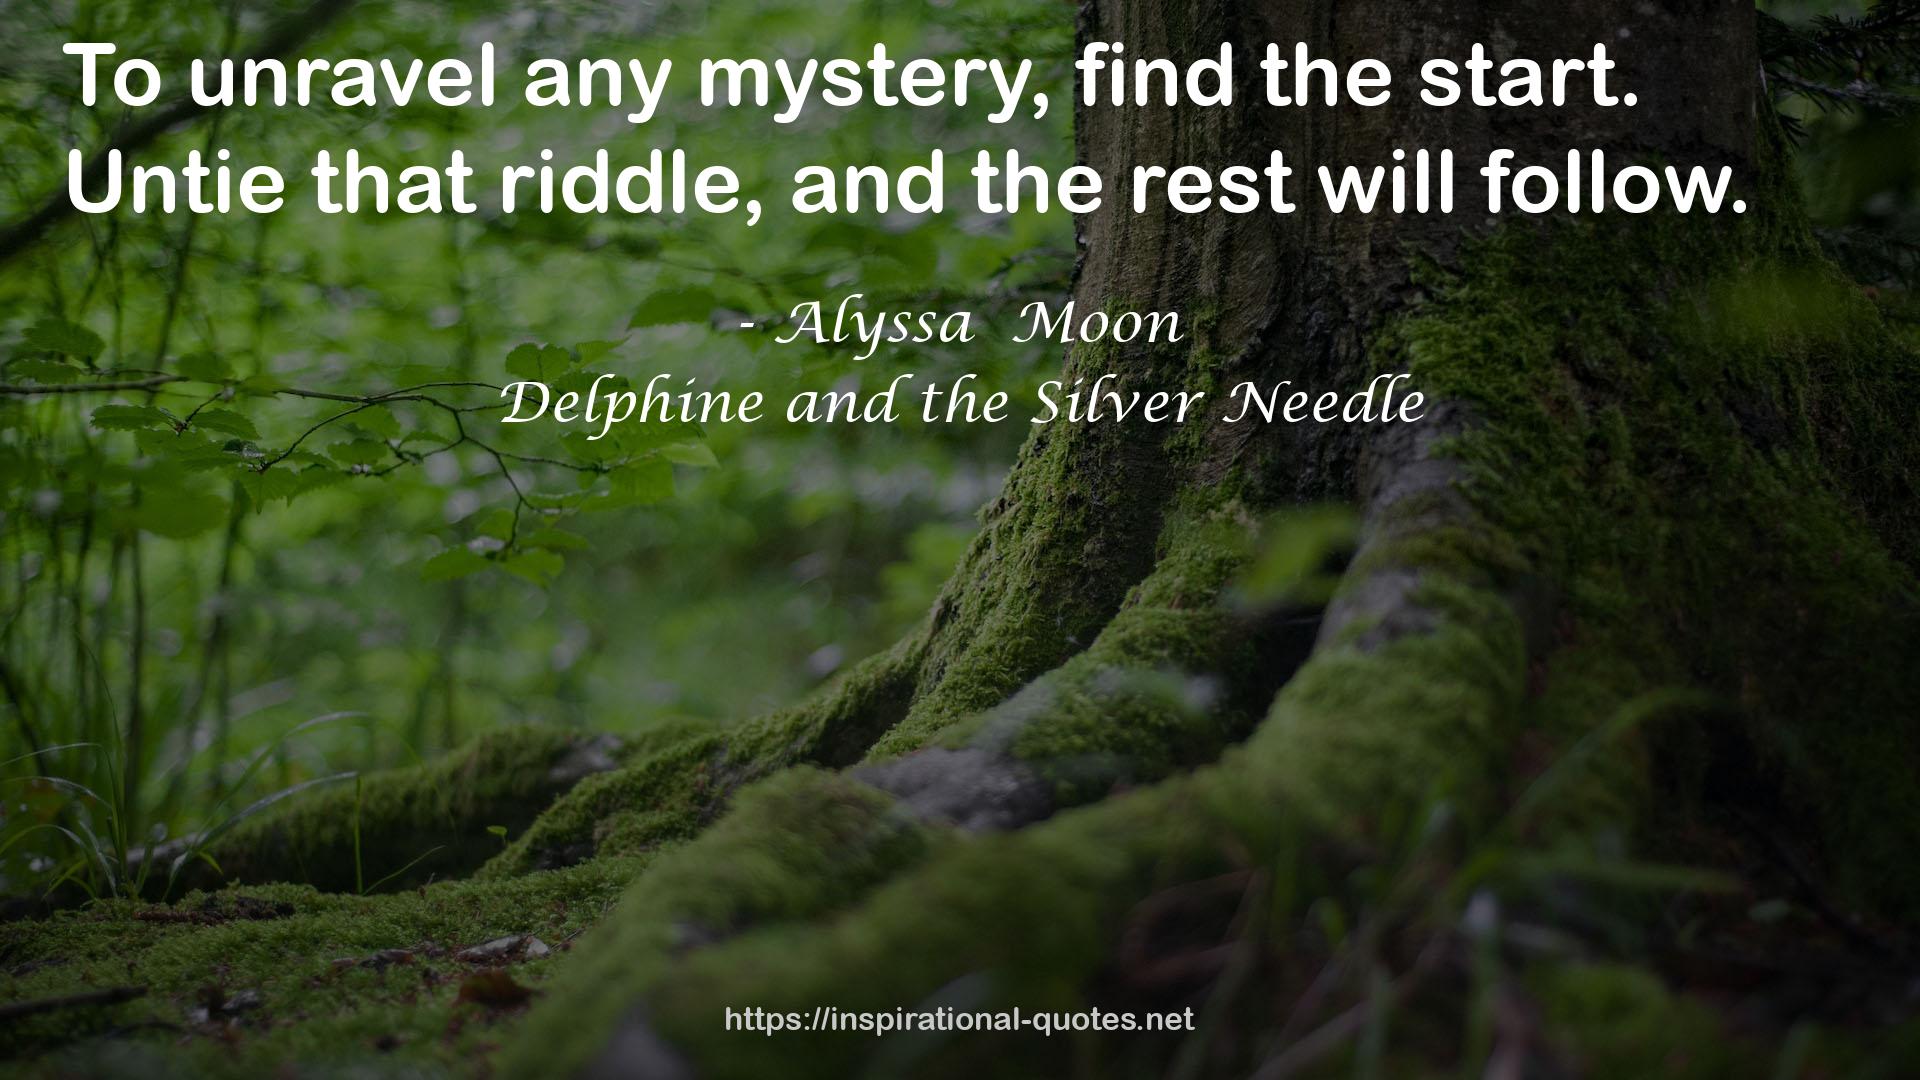 Delphine and the Silver Needle QUOTES